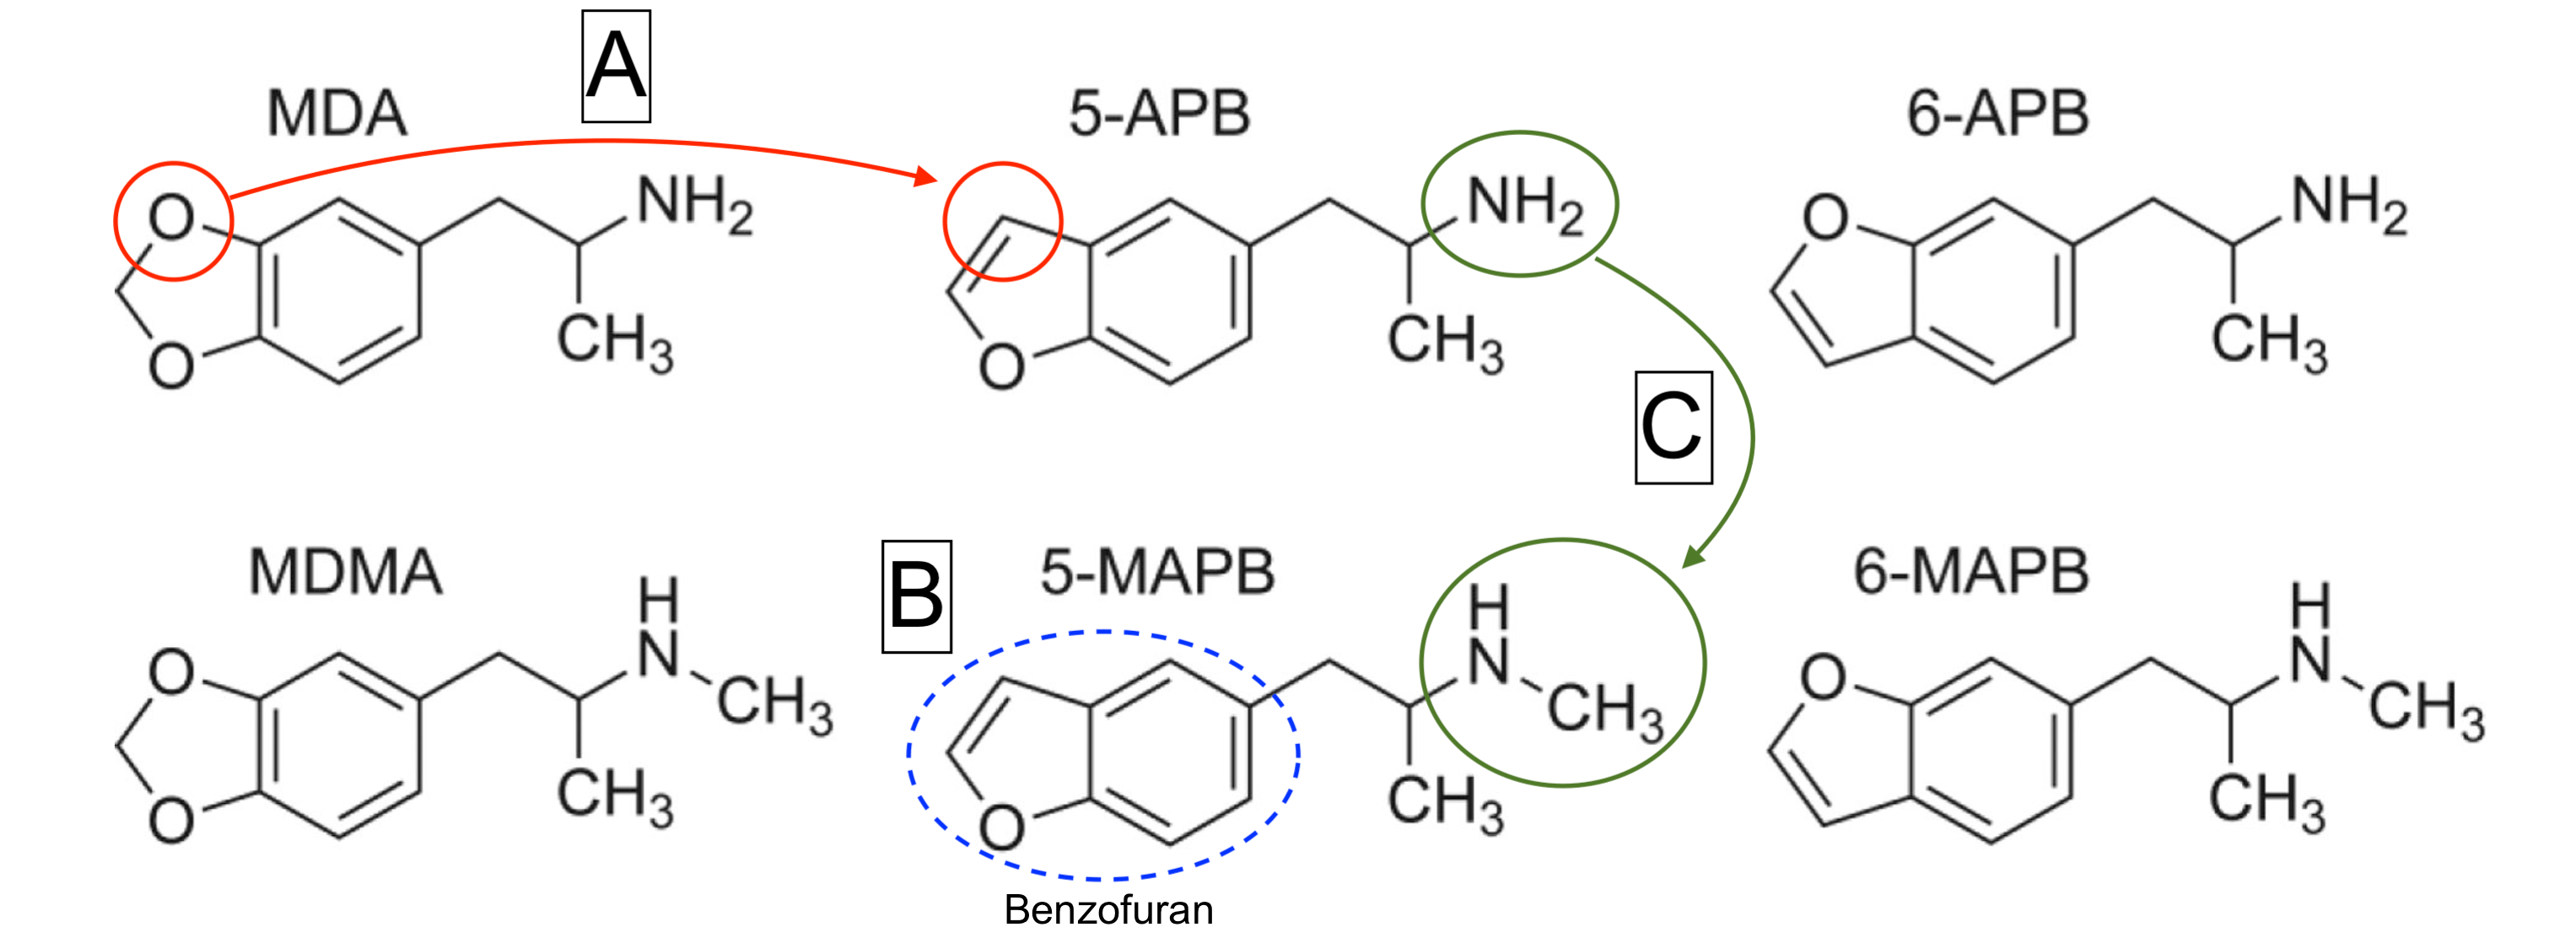 Figure 1: Chemical structures of the prototypical entactogens MDA and MDMA alongside the chemical structures of the most common substituted benzofurans: 5-APB, 6-APB, 5-MAPB, and 6-MAPB. Removal of one oxygen from the methylenedioxy ring and subsequent substitution with a carbon (A) creates a benzofuran structure (B). N-methylation: addition of a methyl group to the nitrogen of 5-APB (C). Adapted from Brandt et al., 2020 by Harrison Elder.